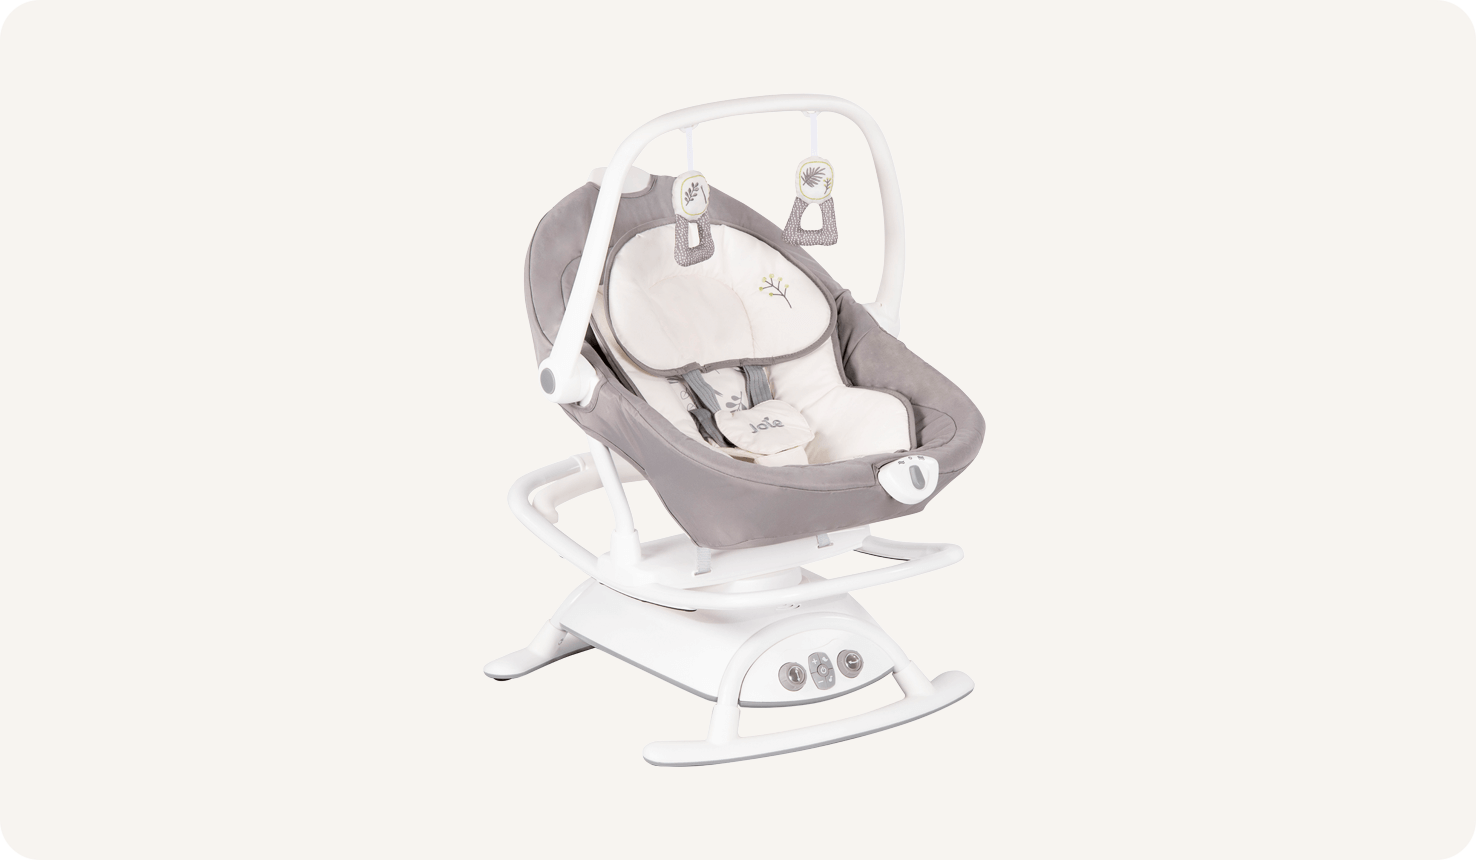  Light gray Joie sansa 2in1 swing at a right angle with toy bar displayed. 